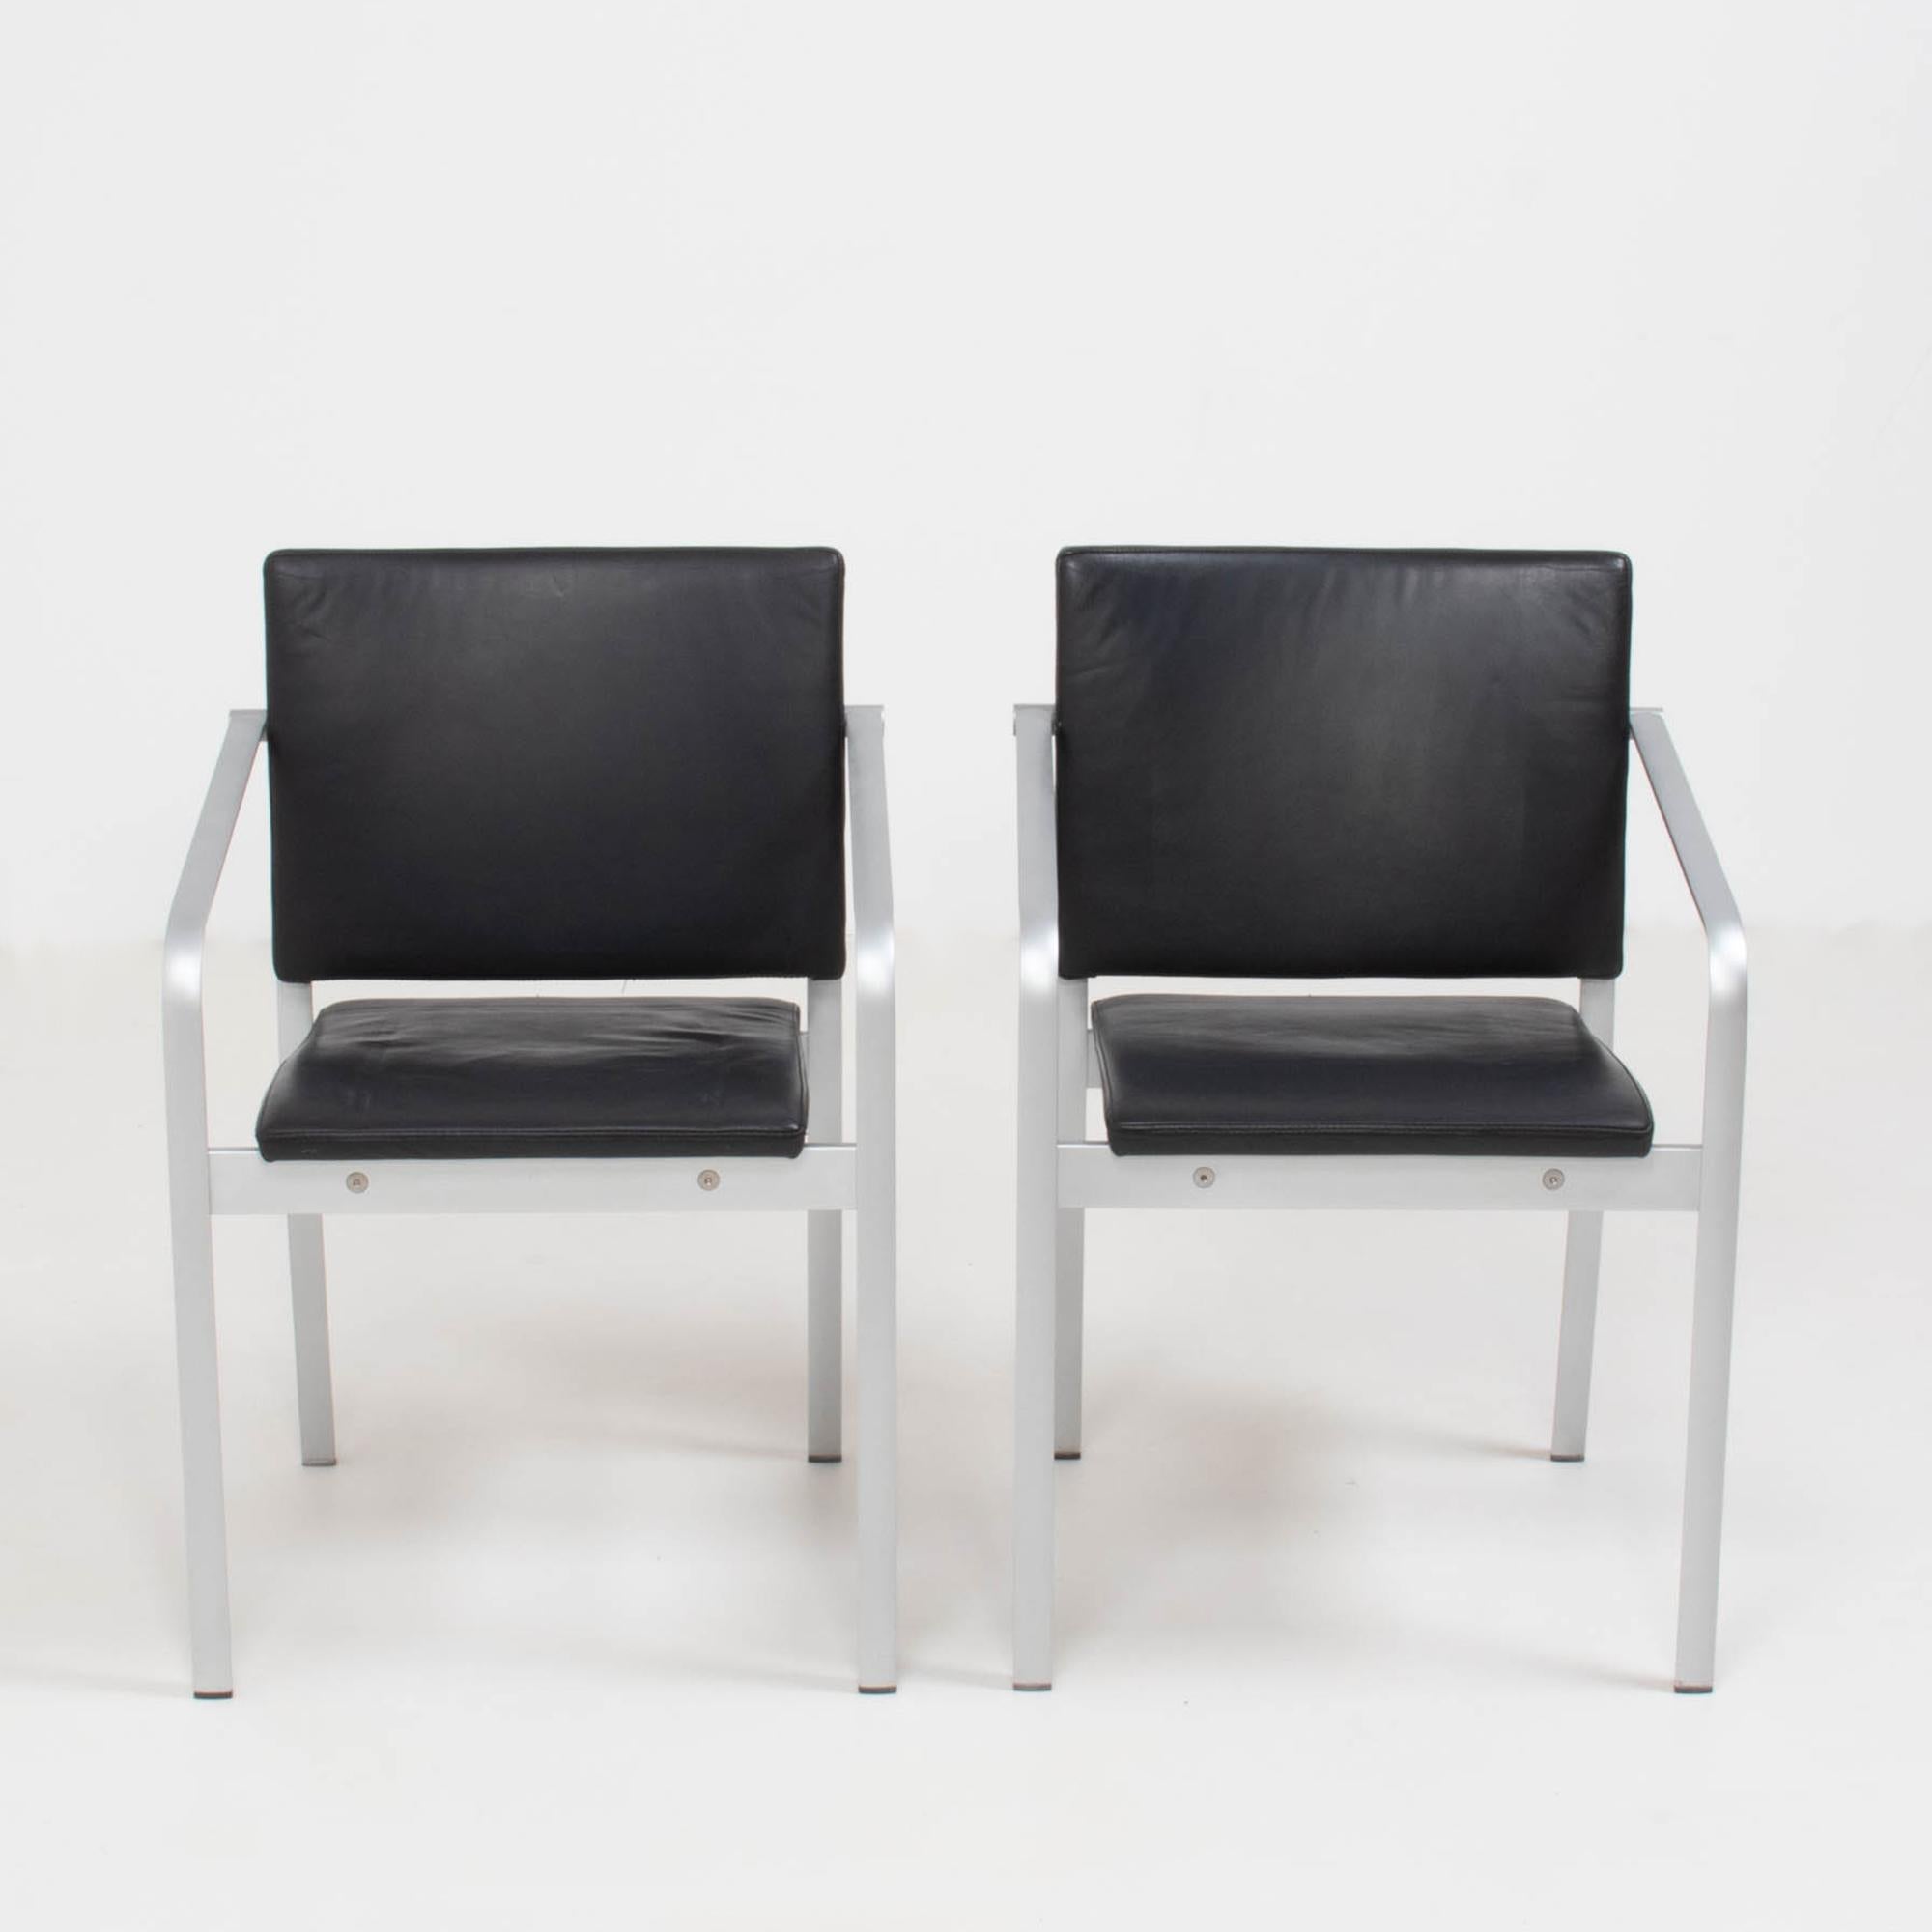 German Thonet by Norman Foster A901 PF Aluminium and Black Leather Dining Chairs, Pair